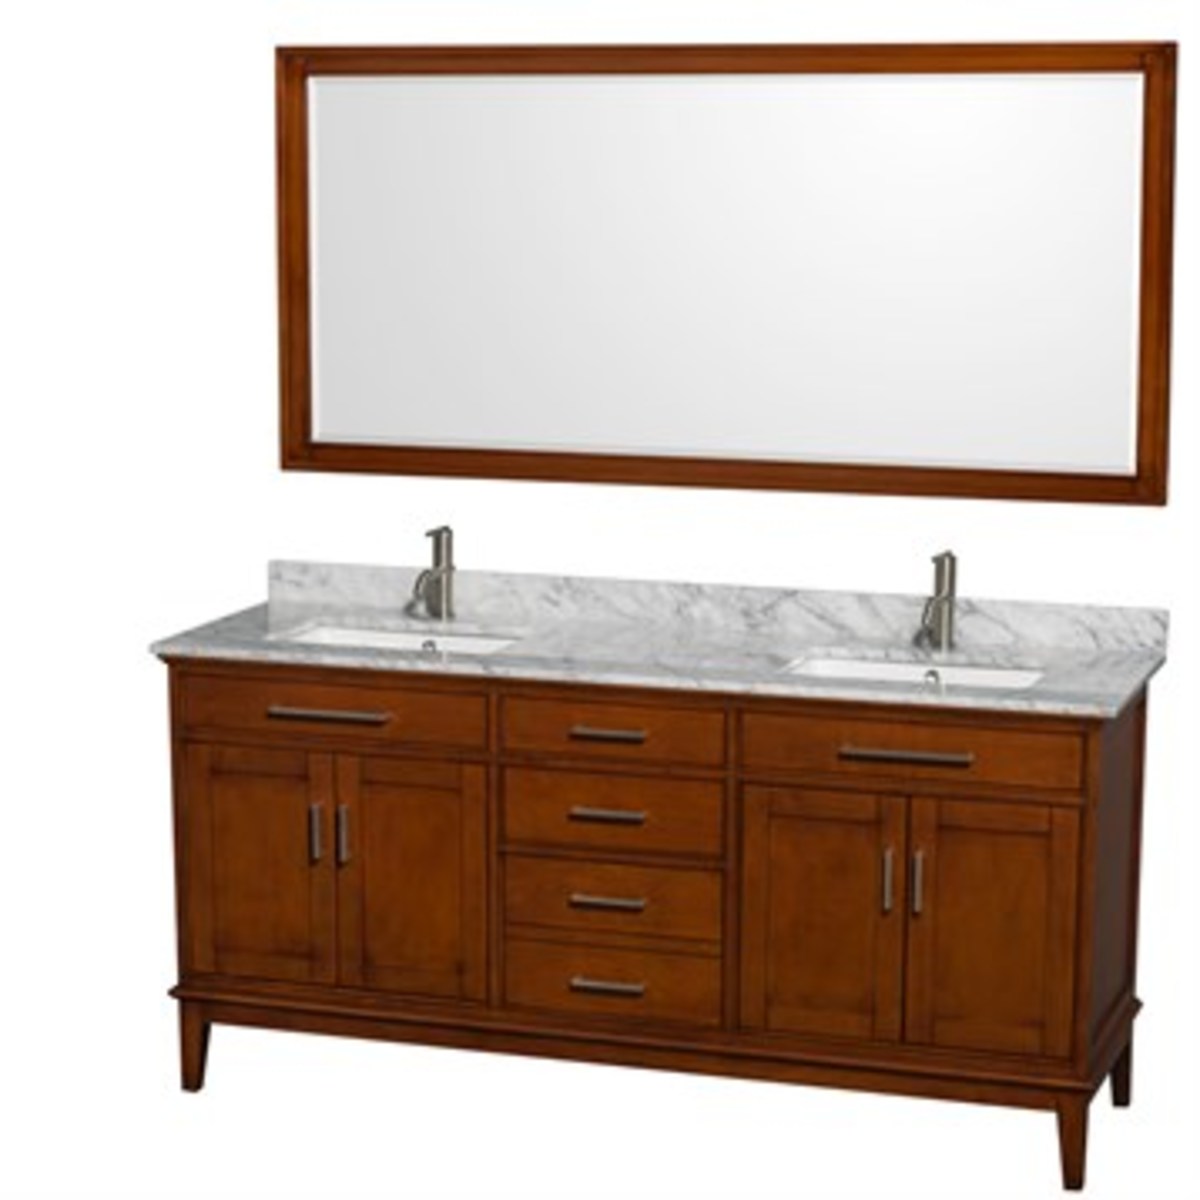 The Wyndham Hatton vanity comes in a chestnut finish that complements a Craftsman home's woodwork. The rectangular sink basins give it a current feel.